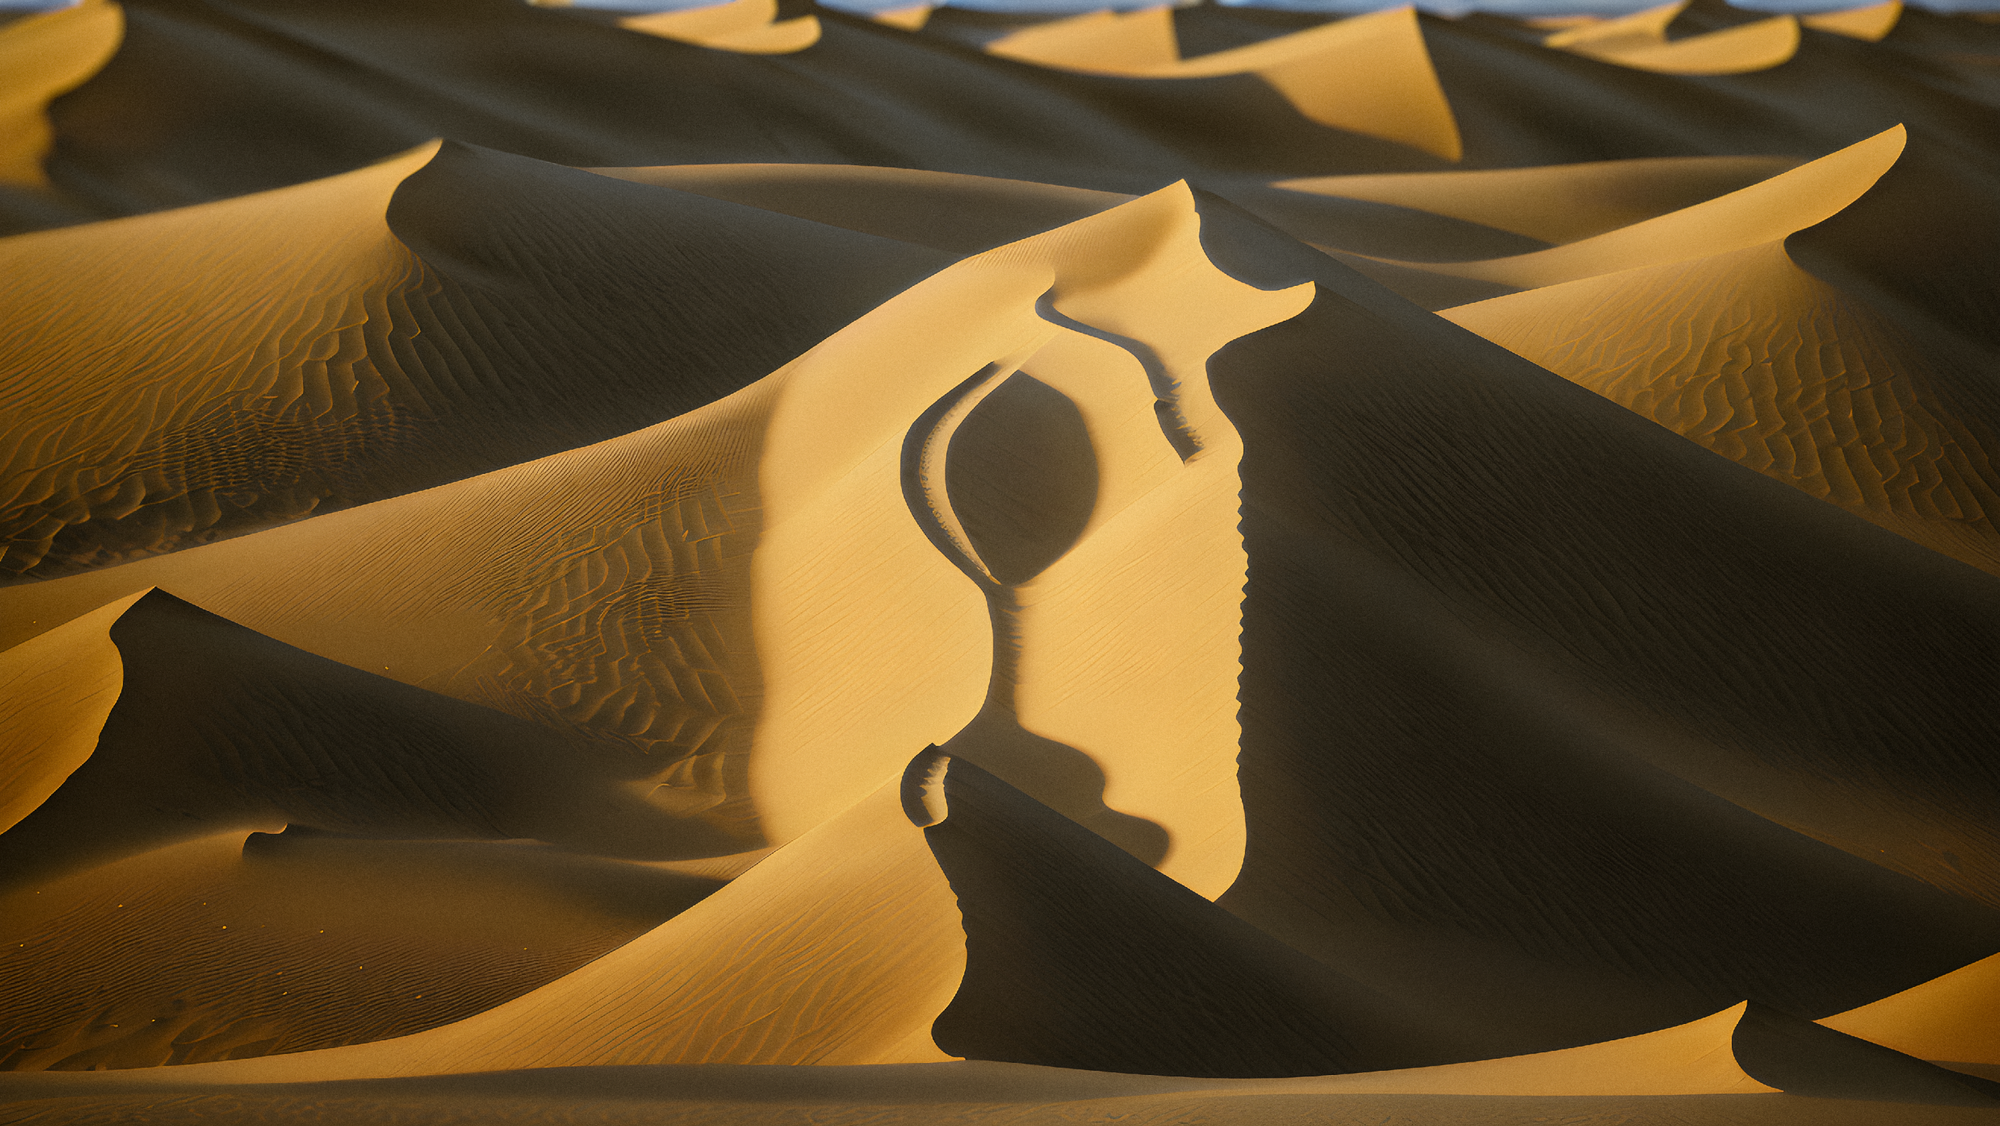 cascading dunes dominating the image. As the sunsets over the mounds of beige sand, a shadow forms in the shape of LaunchJoy's logo, a joystick front and center.